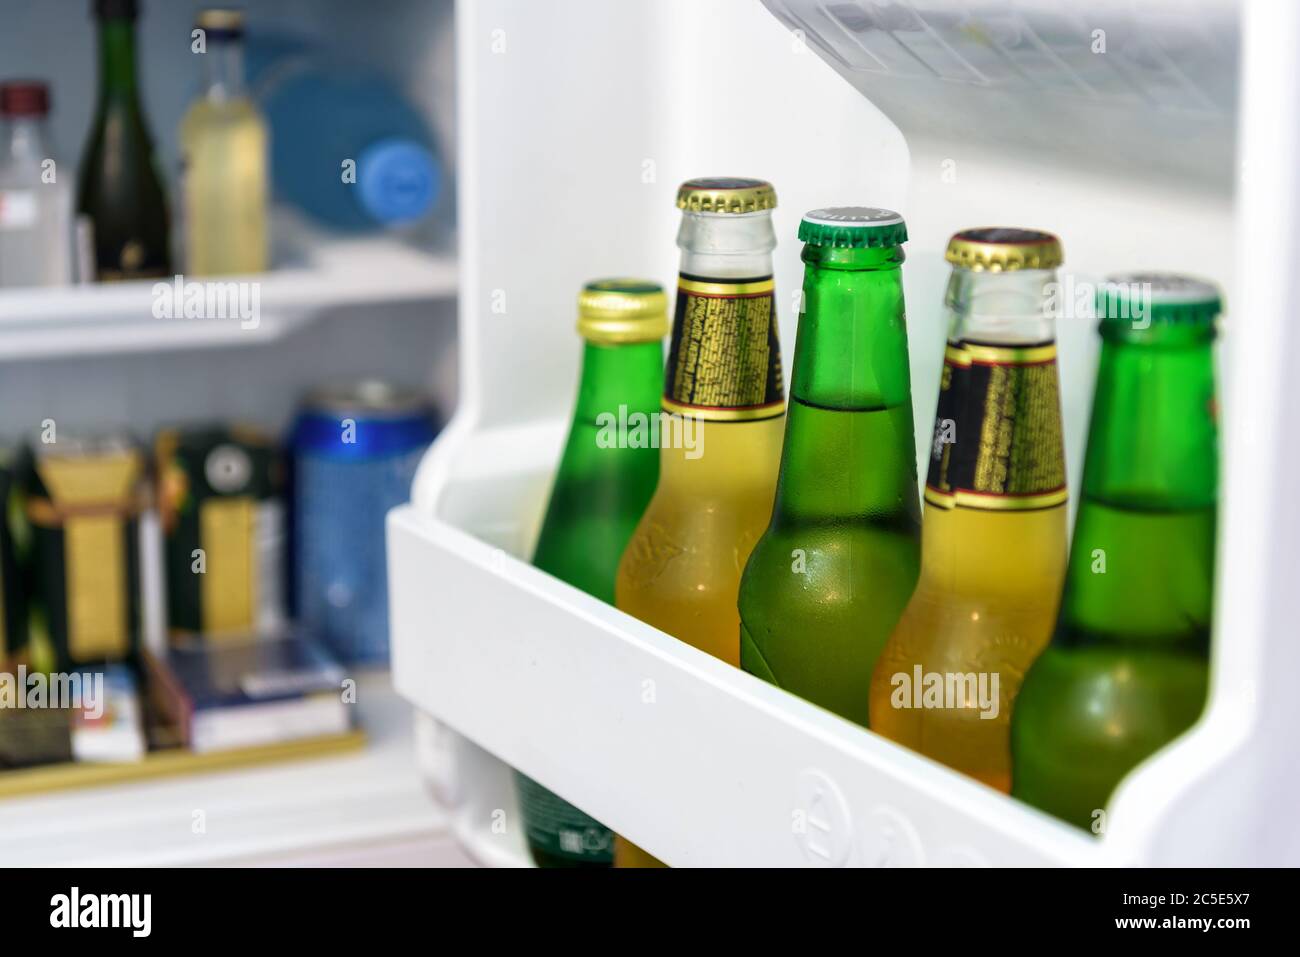 Mini fridge full of bottles of beer, juice and water in a hotel room Stock Photo